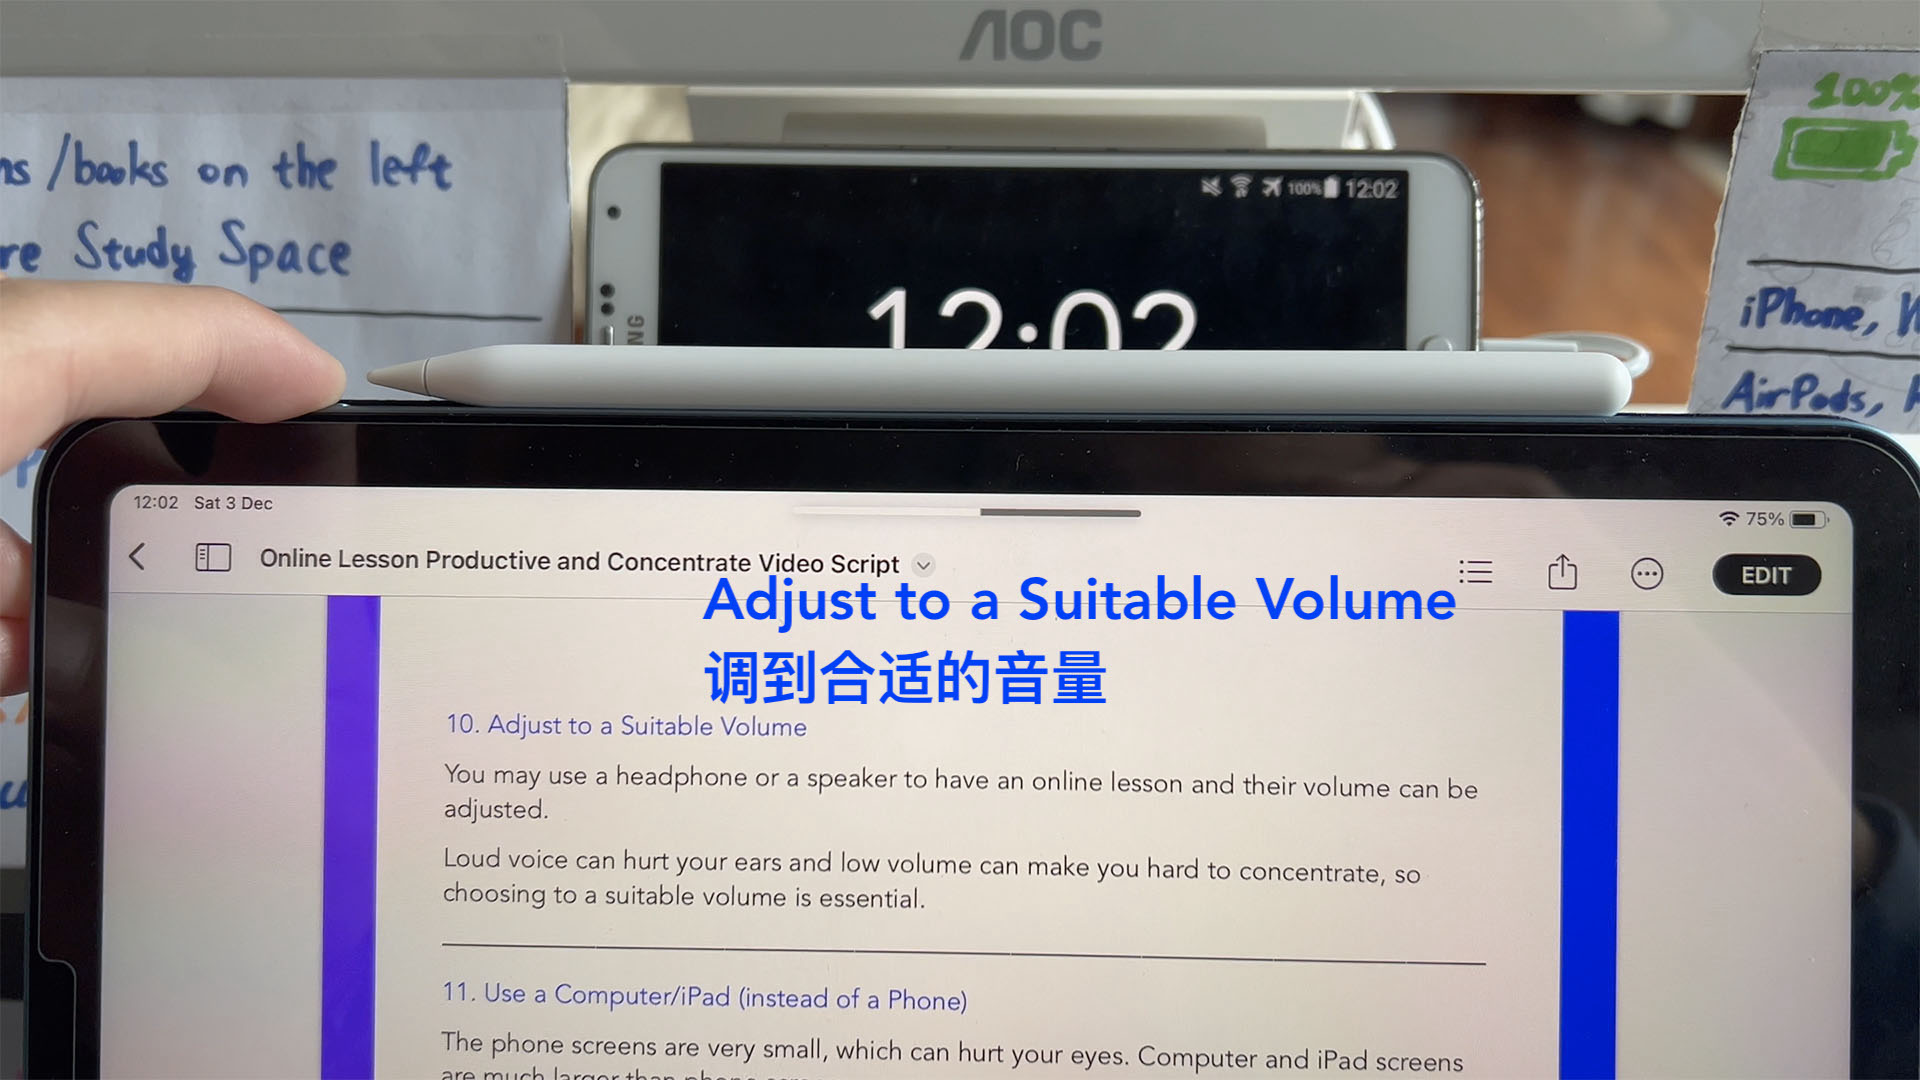 Adjust to a Suitable Volume